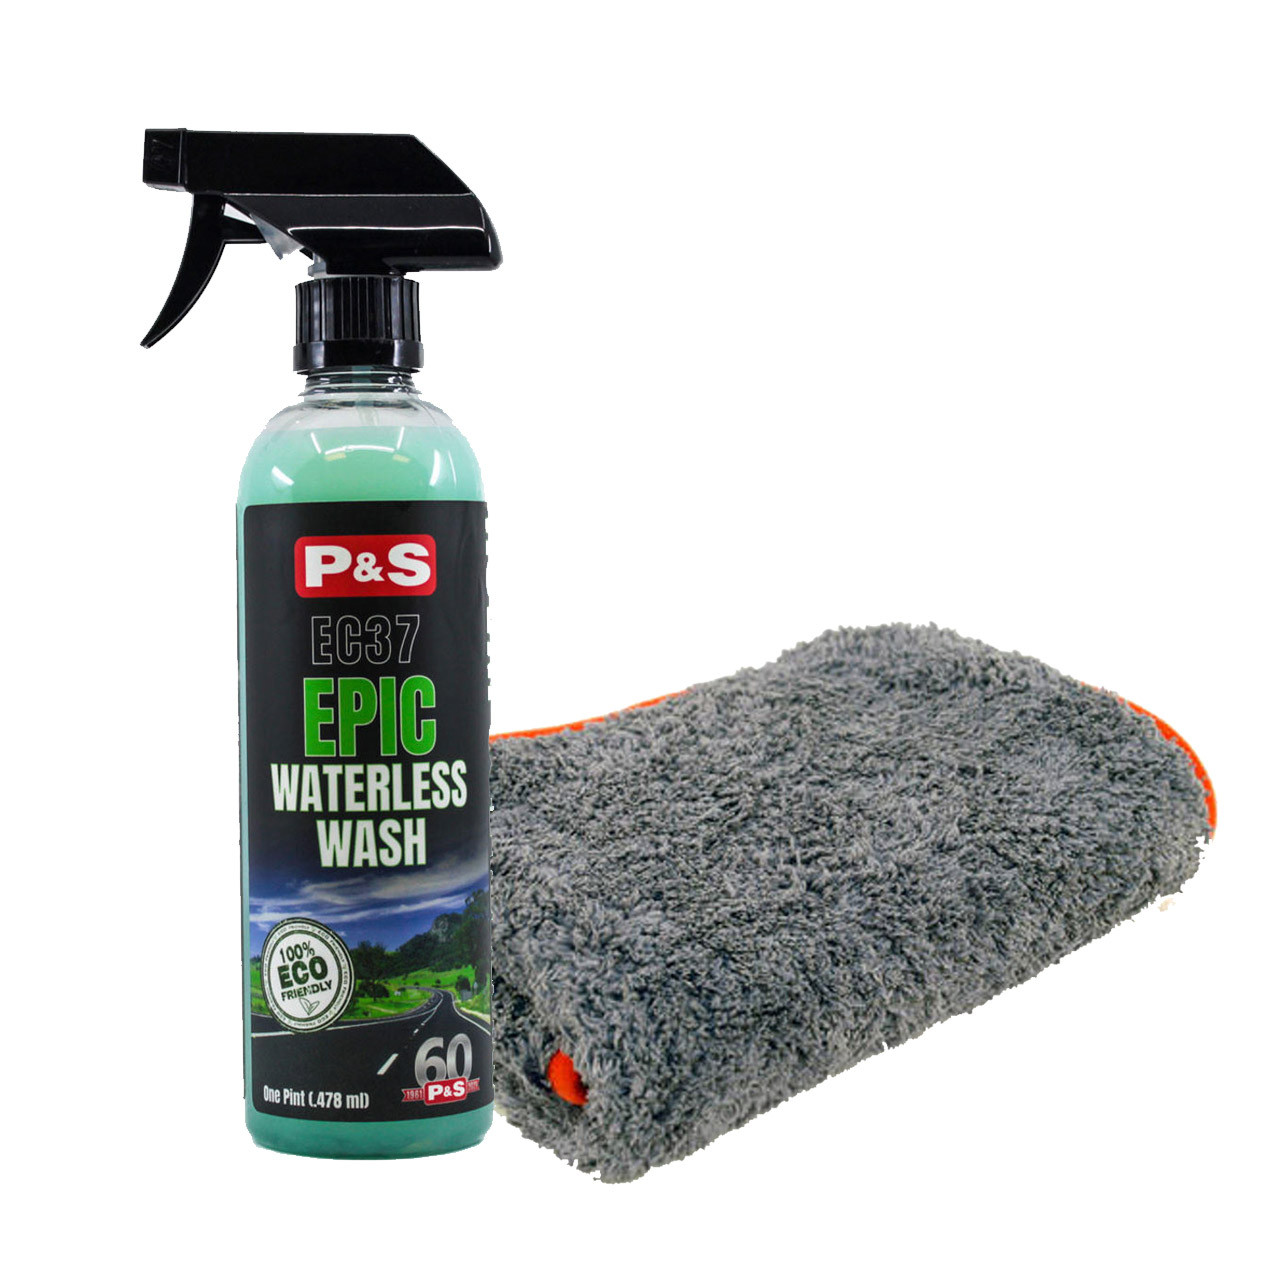 P&S EC37 Epic Waterless Wash Limited Edition Bundle